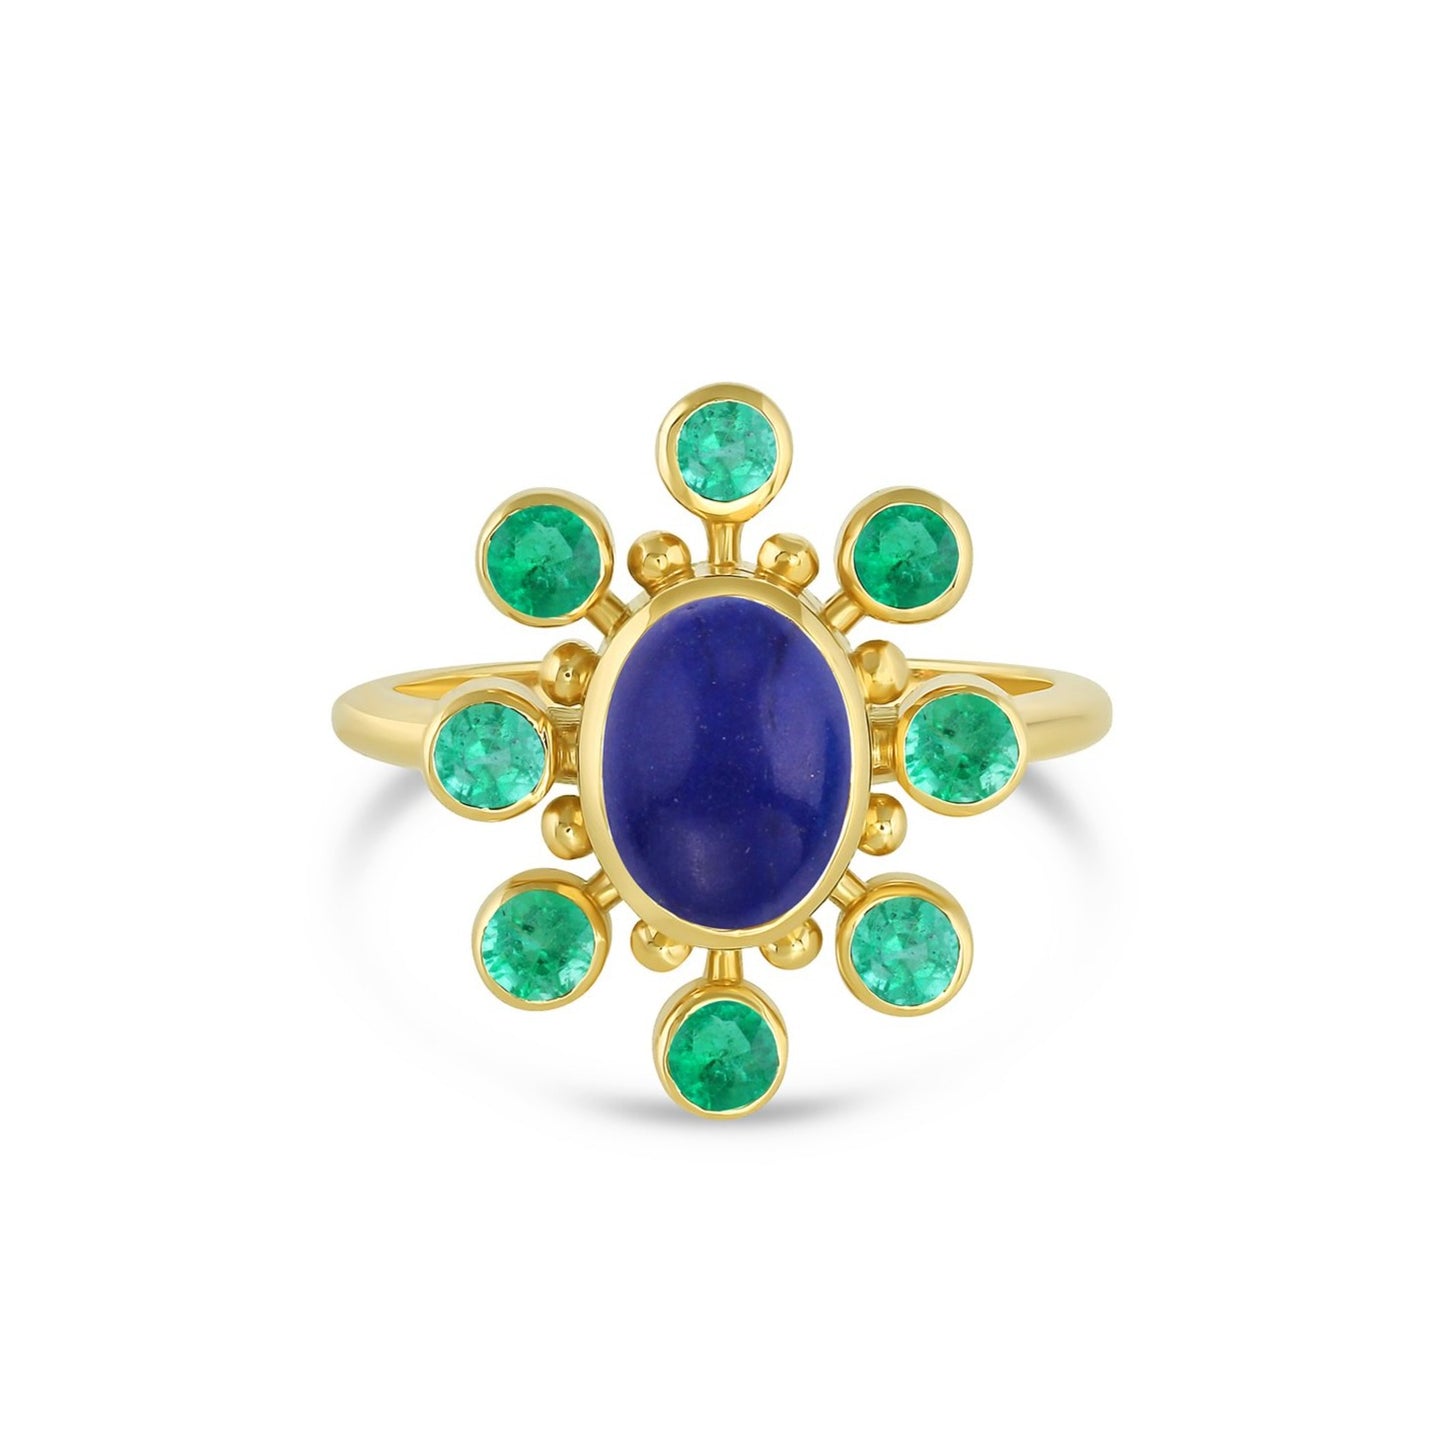 Load image into Gallery viewer, 18k yellow gold cosmos ring with lapis center stone and emerald and gold halo on white background.
